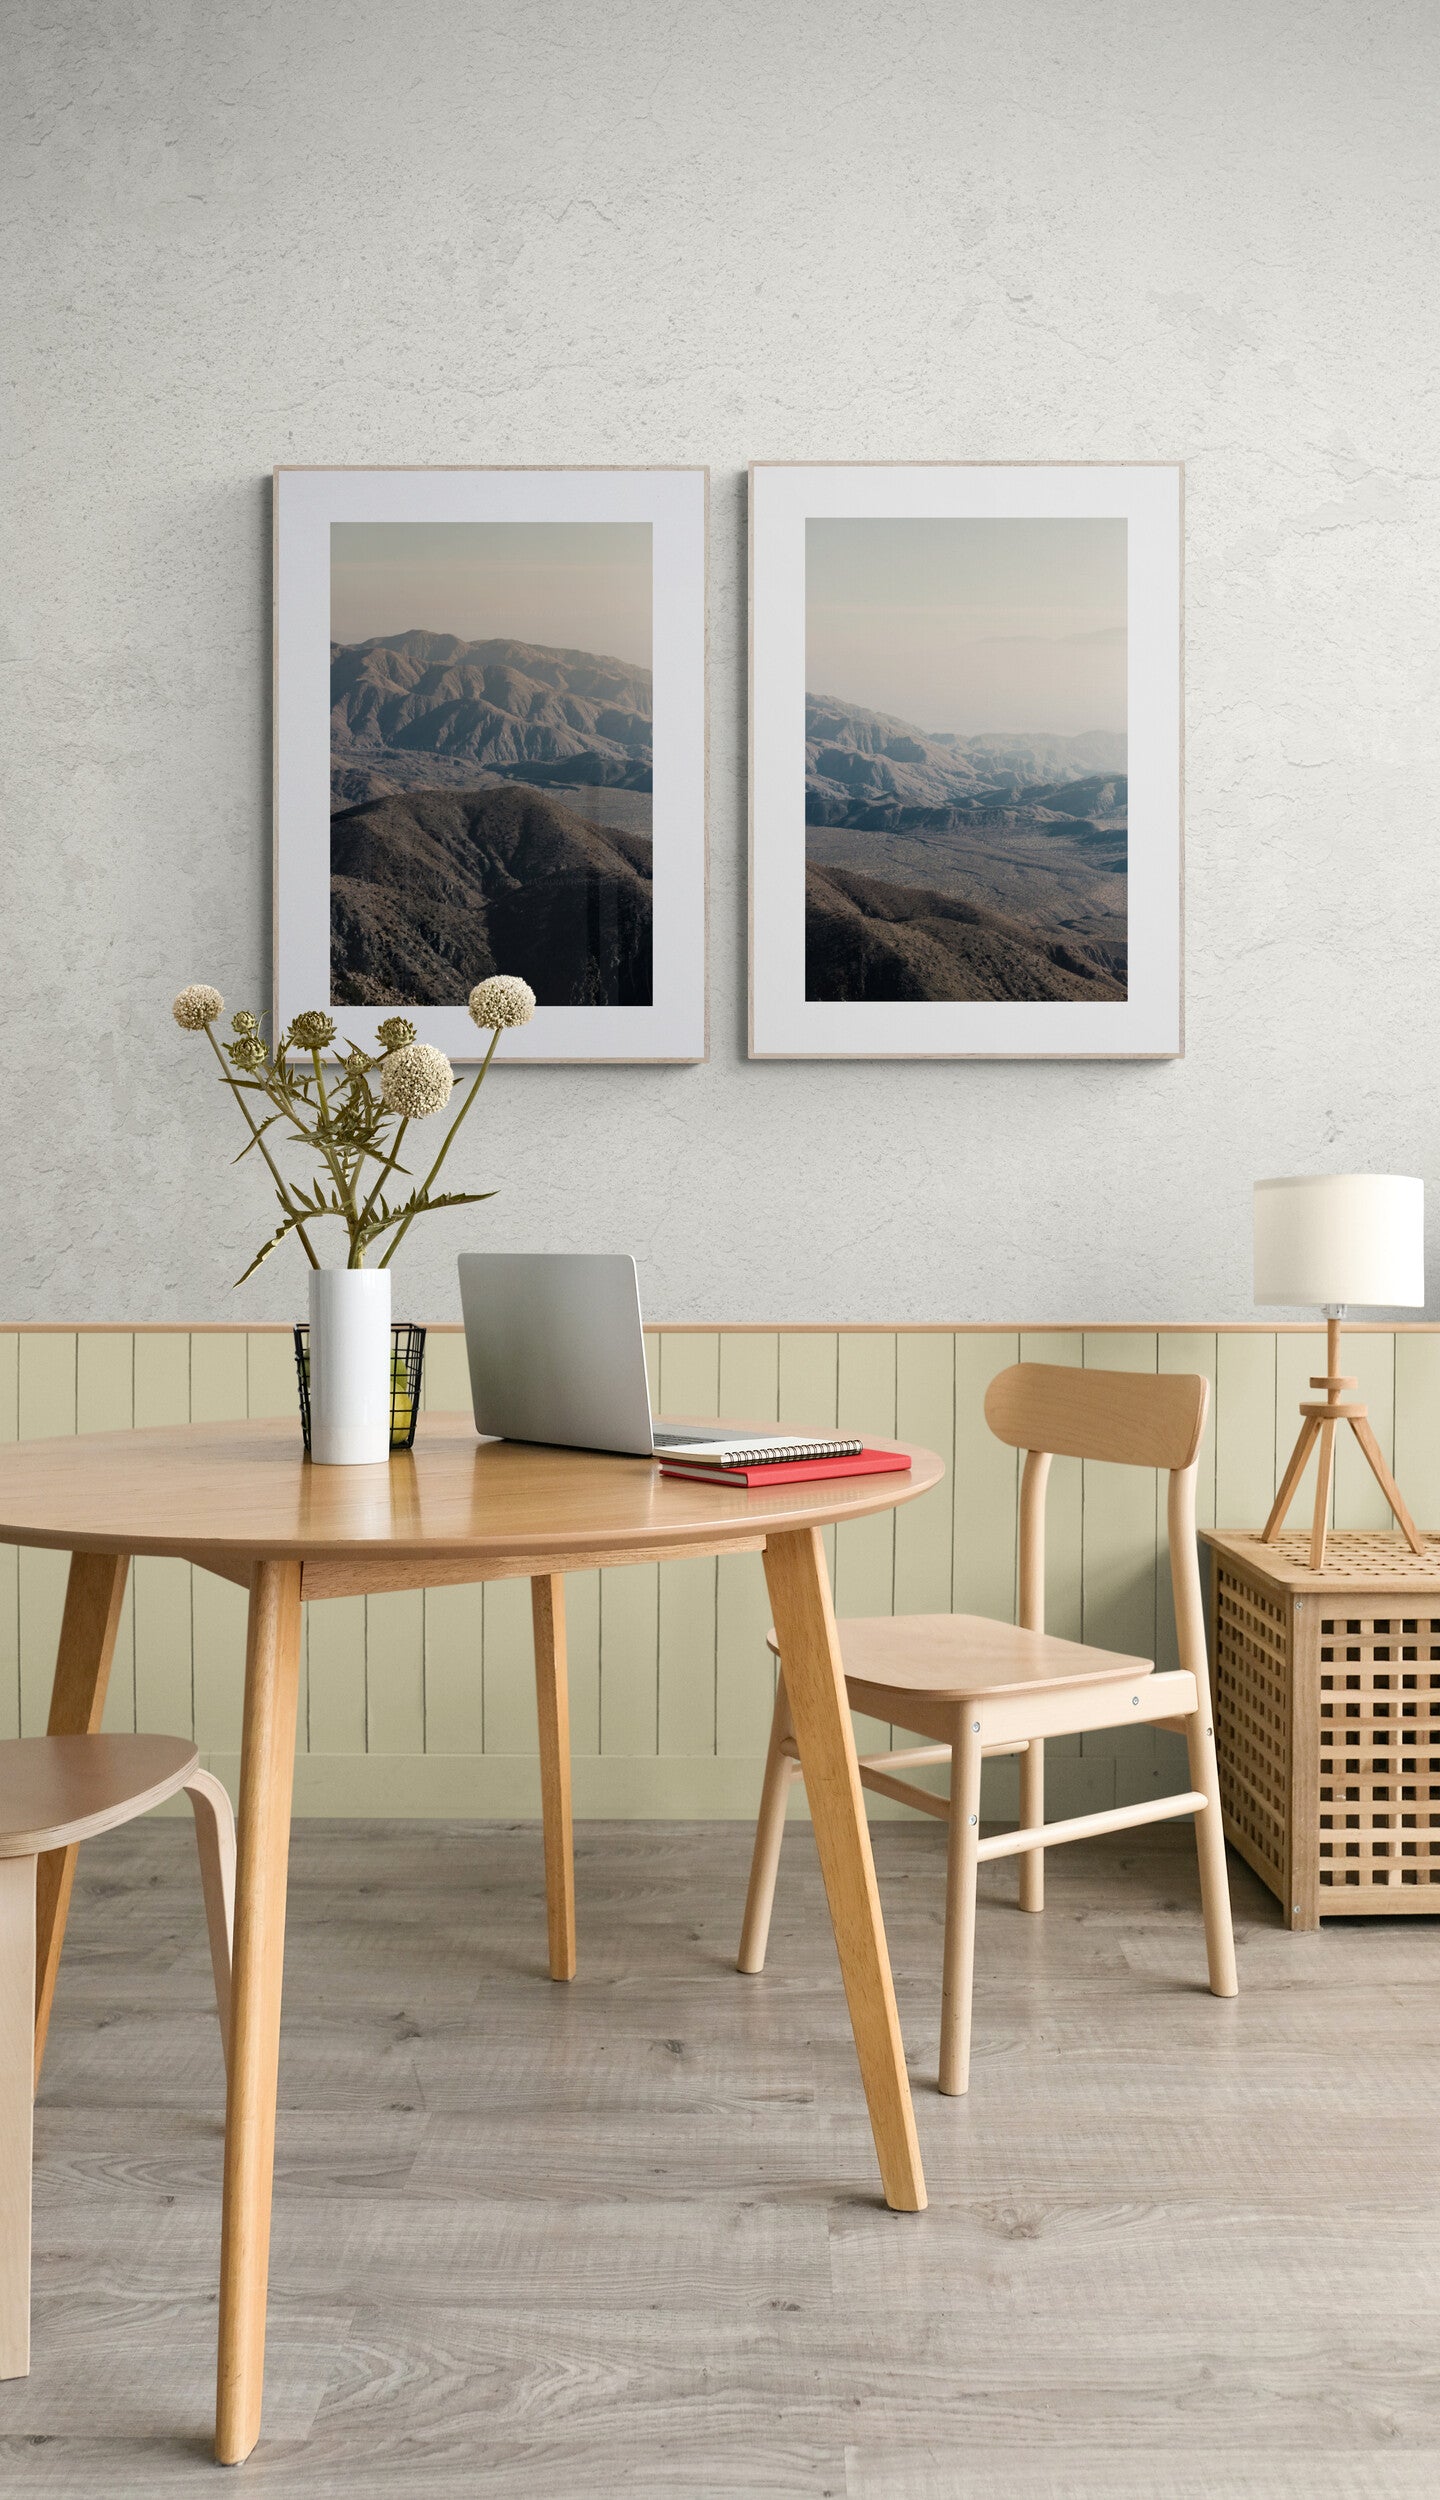 Two Photograph Prints of California Mountains as Wall Art in a casual home office or dining room